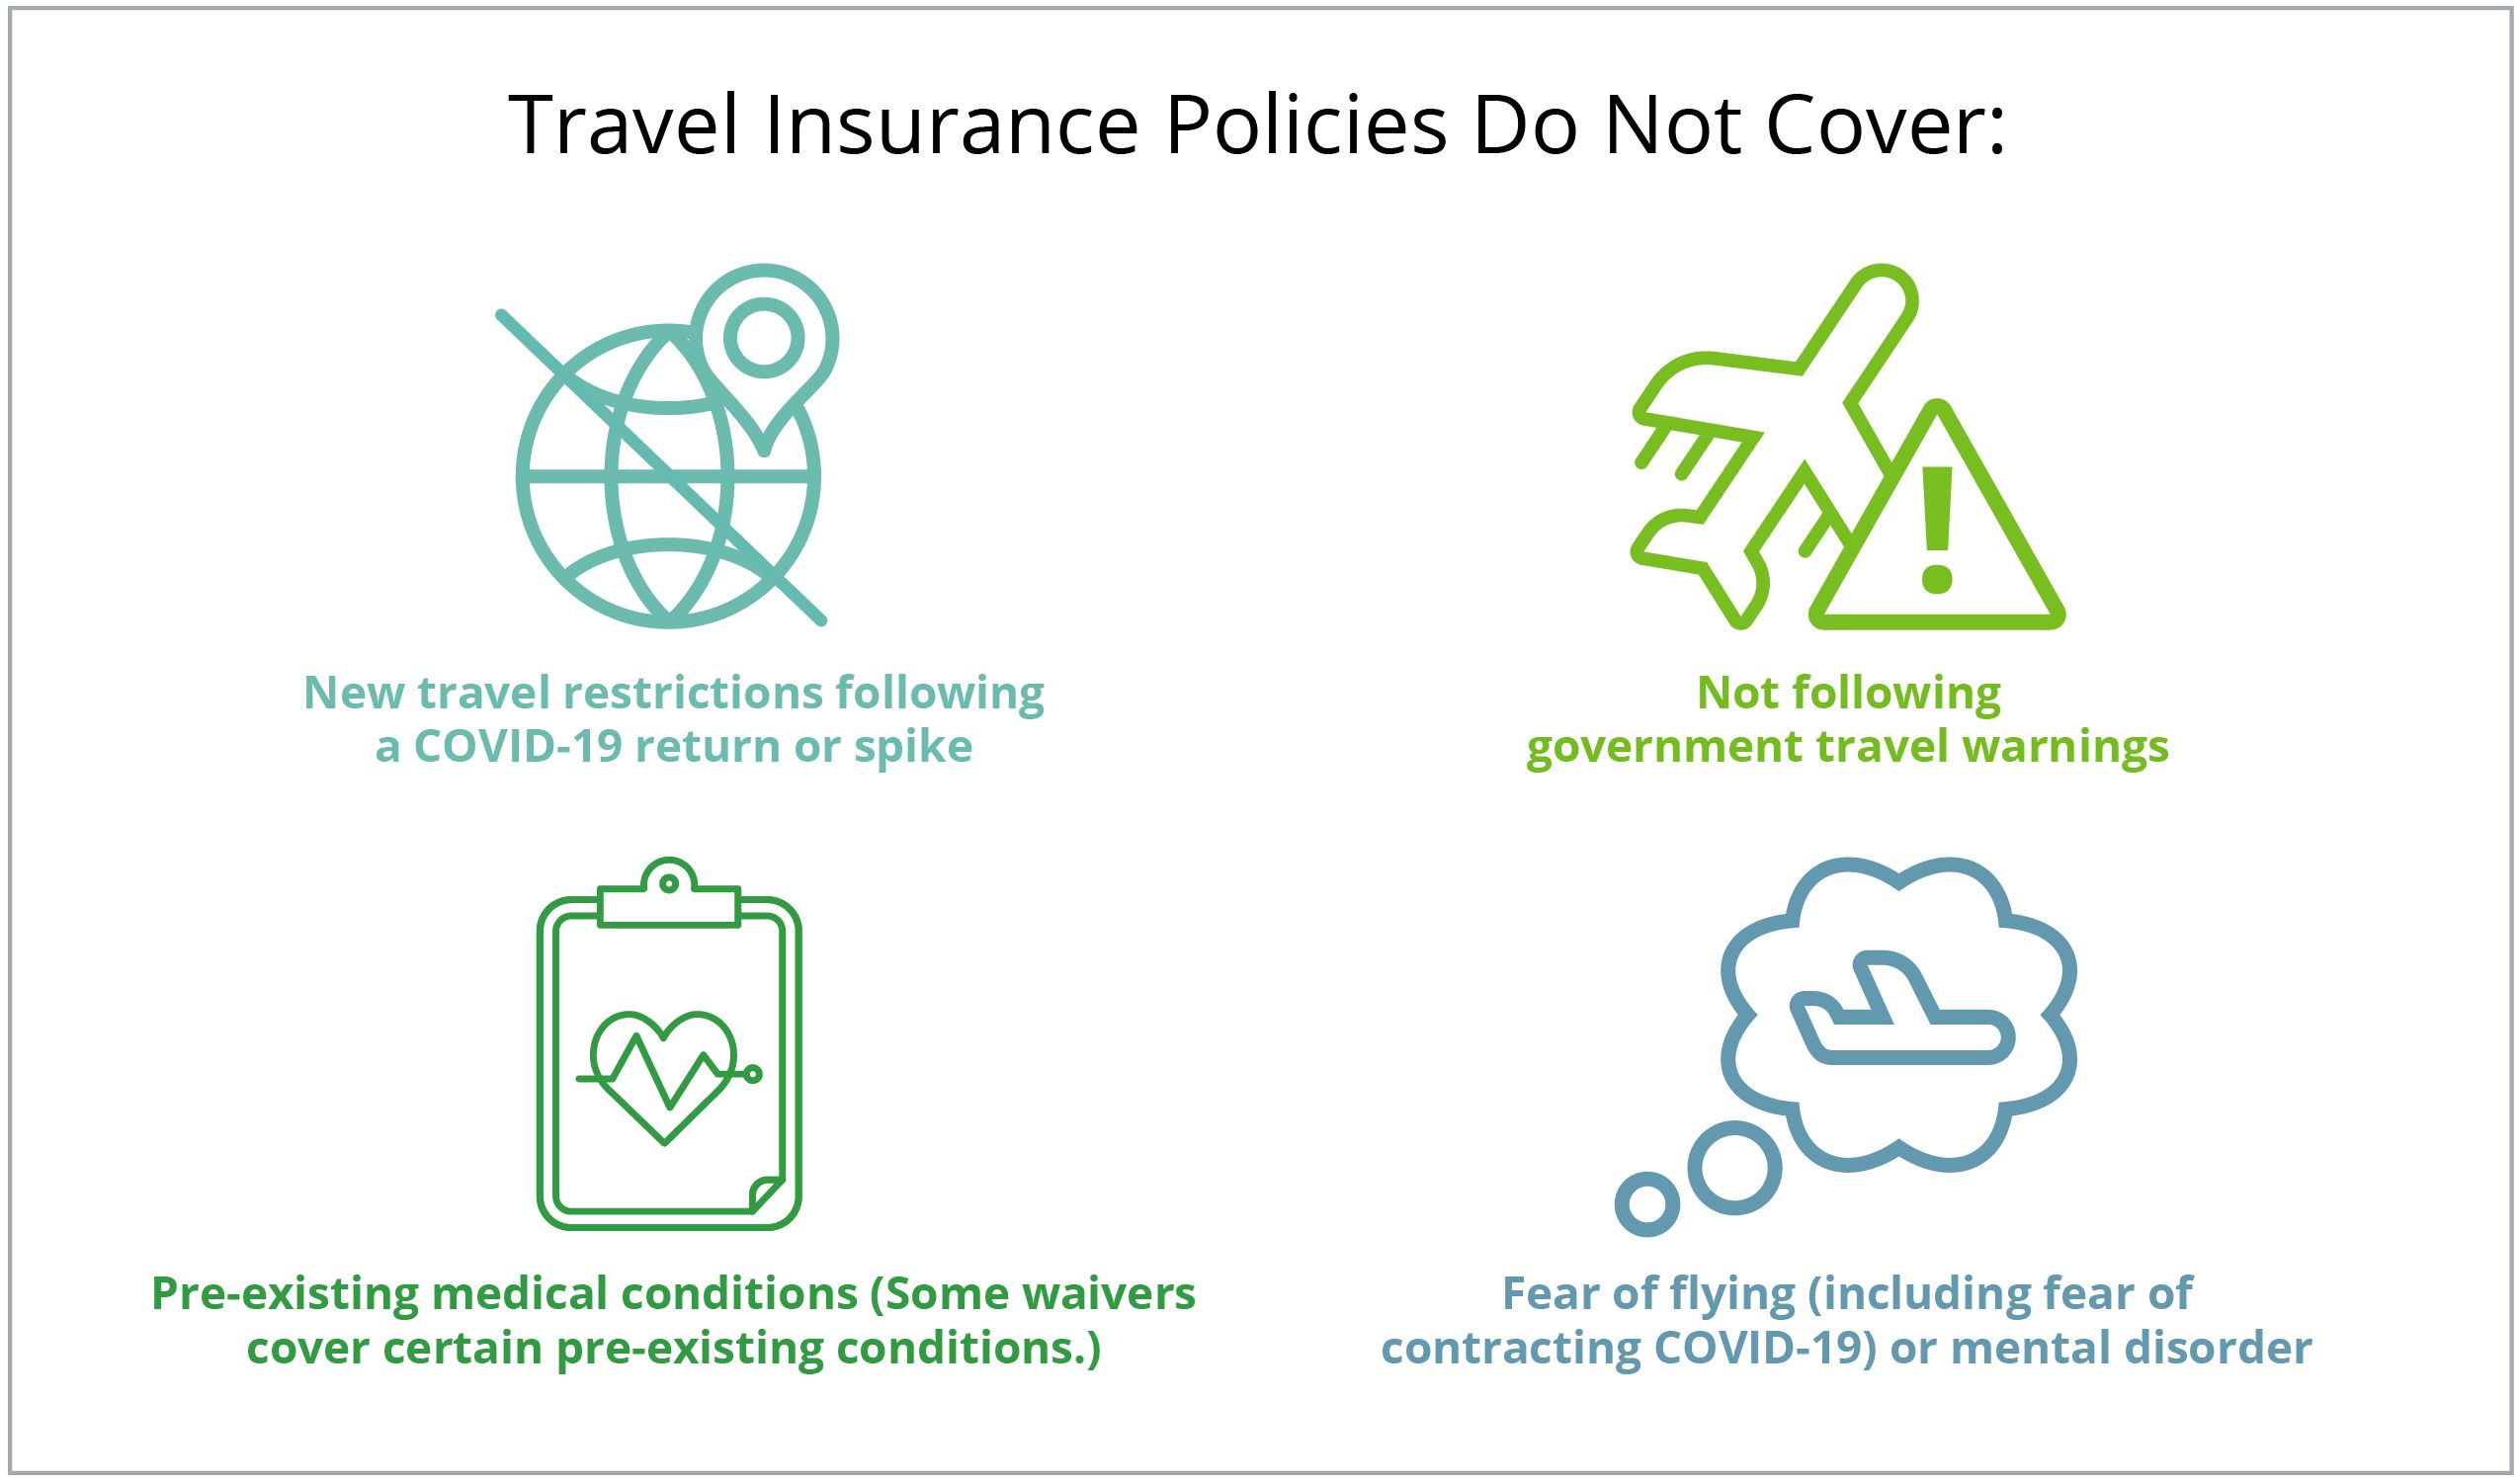 travel insurance policies do not cover travel restrictions following covid-19 spikes and more